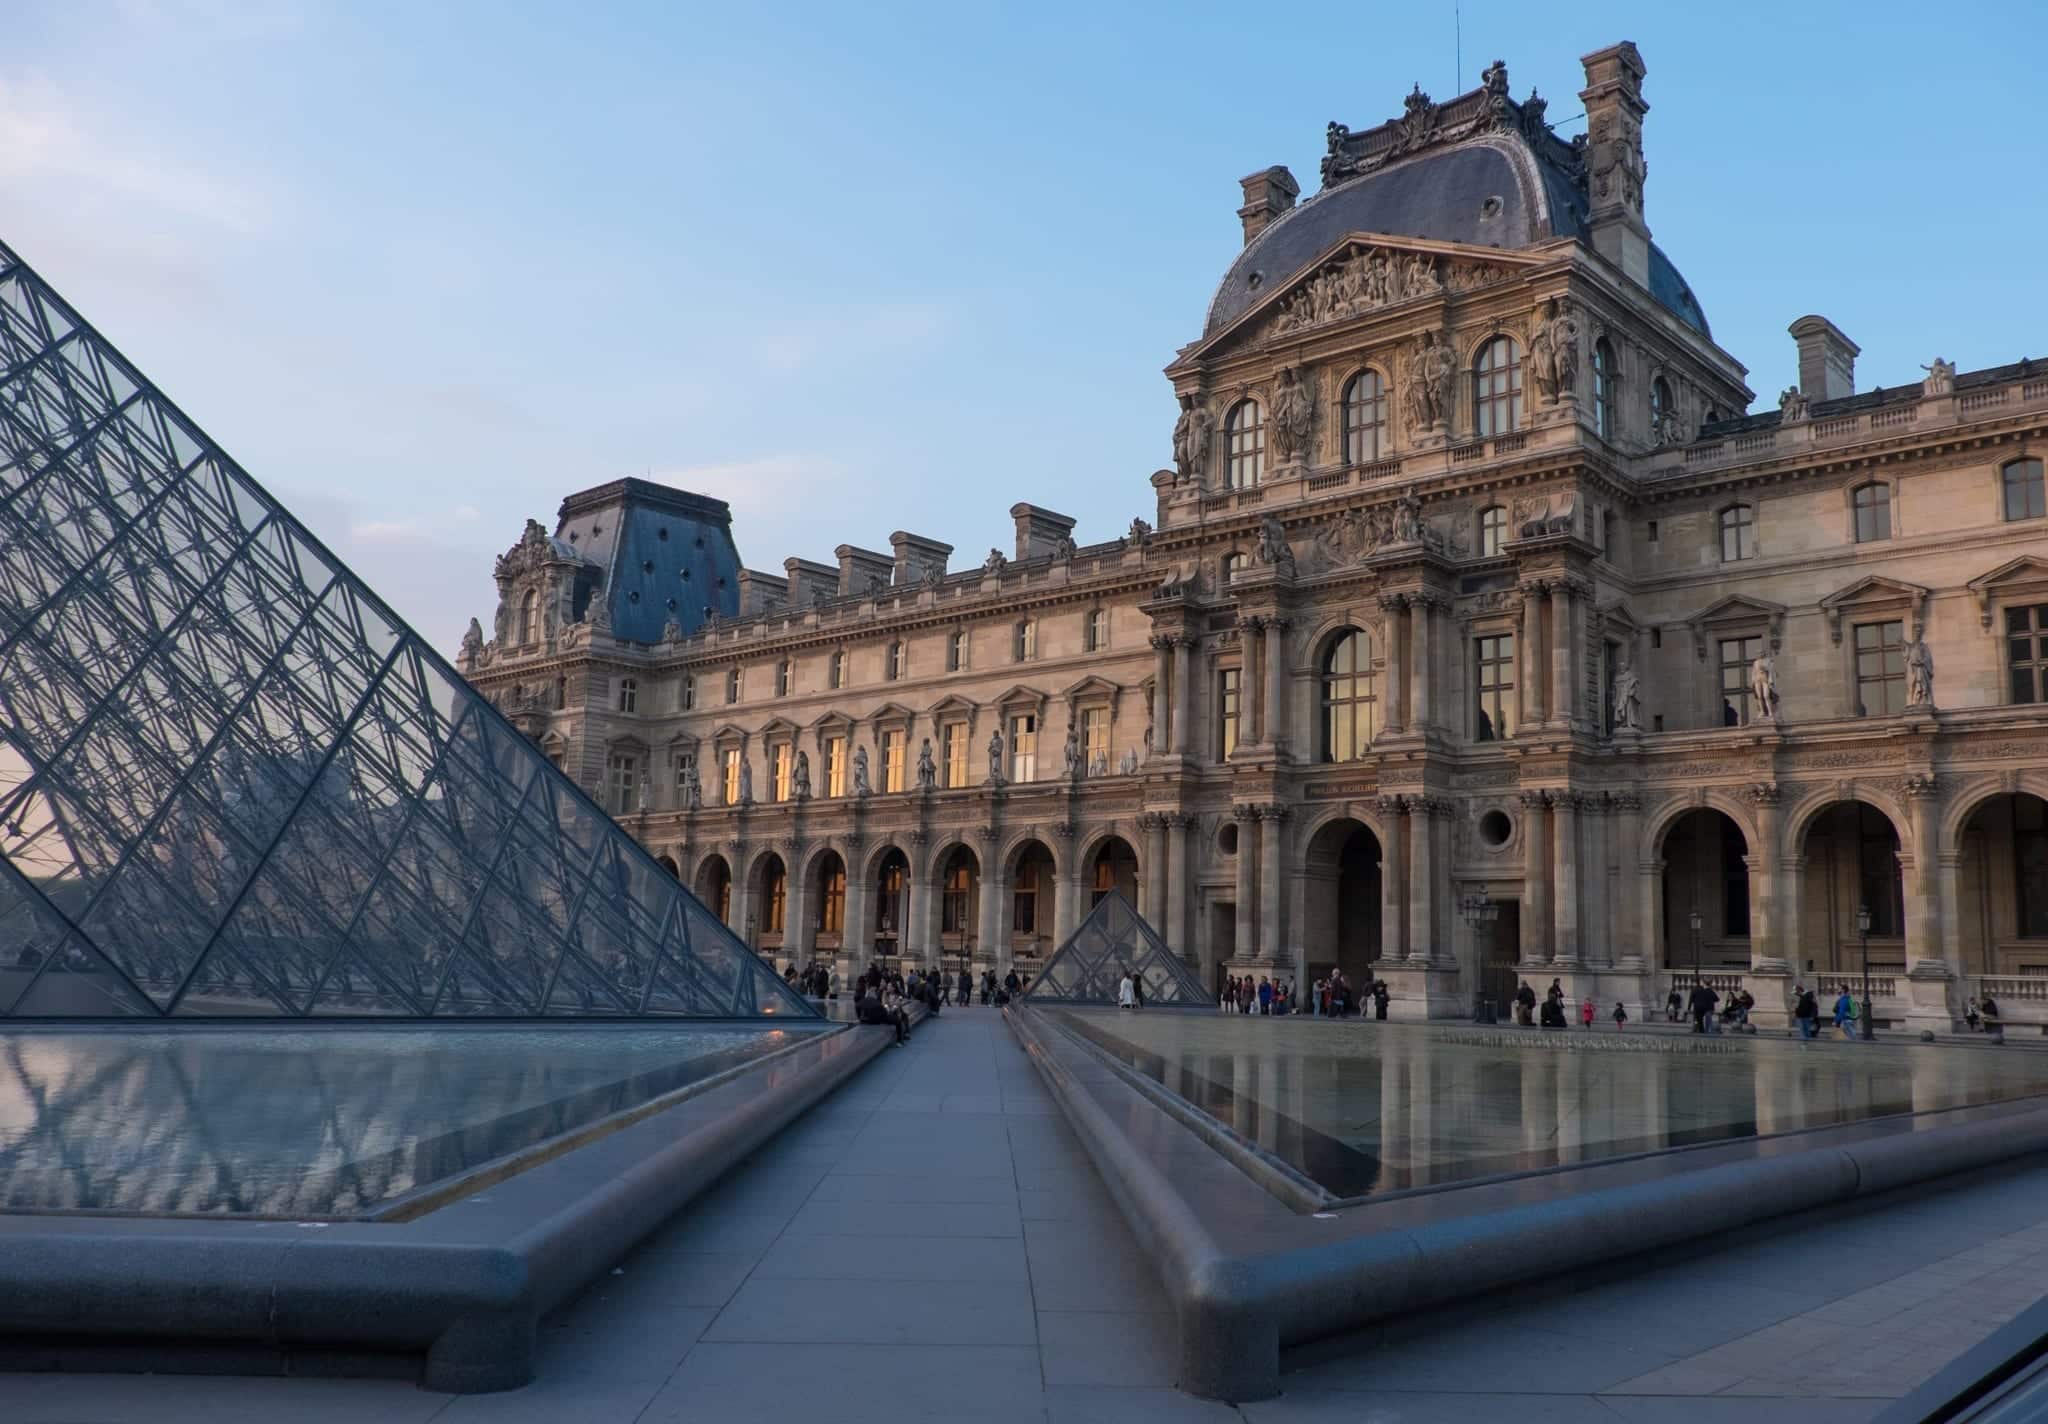 The Louvre's old-fashioned building next to its modern glass pyramid.